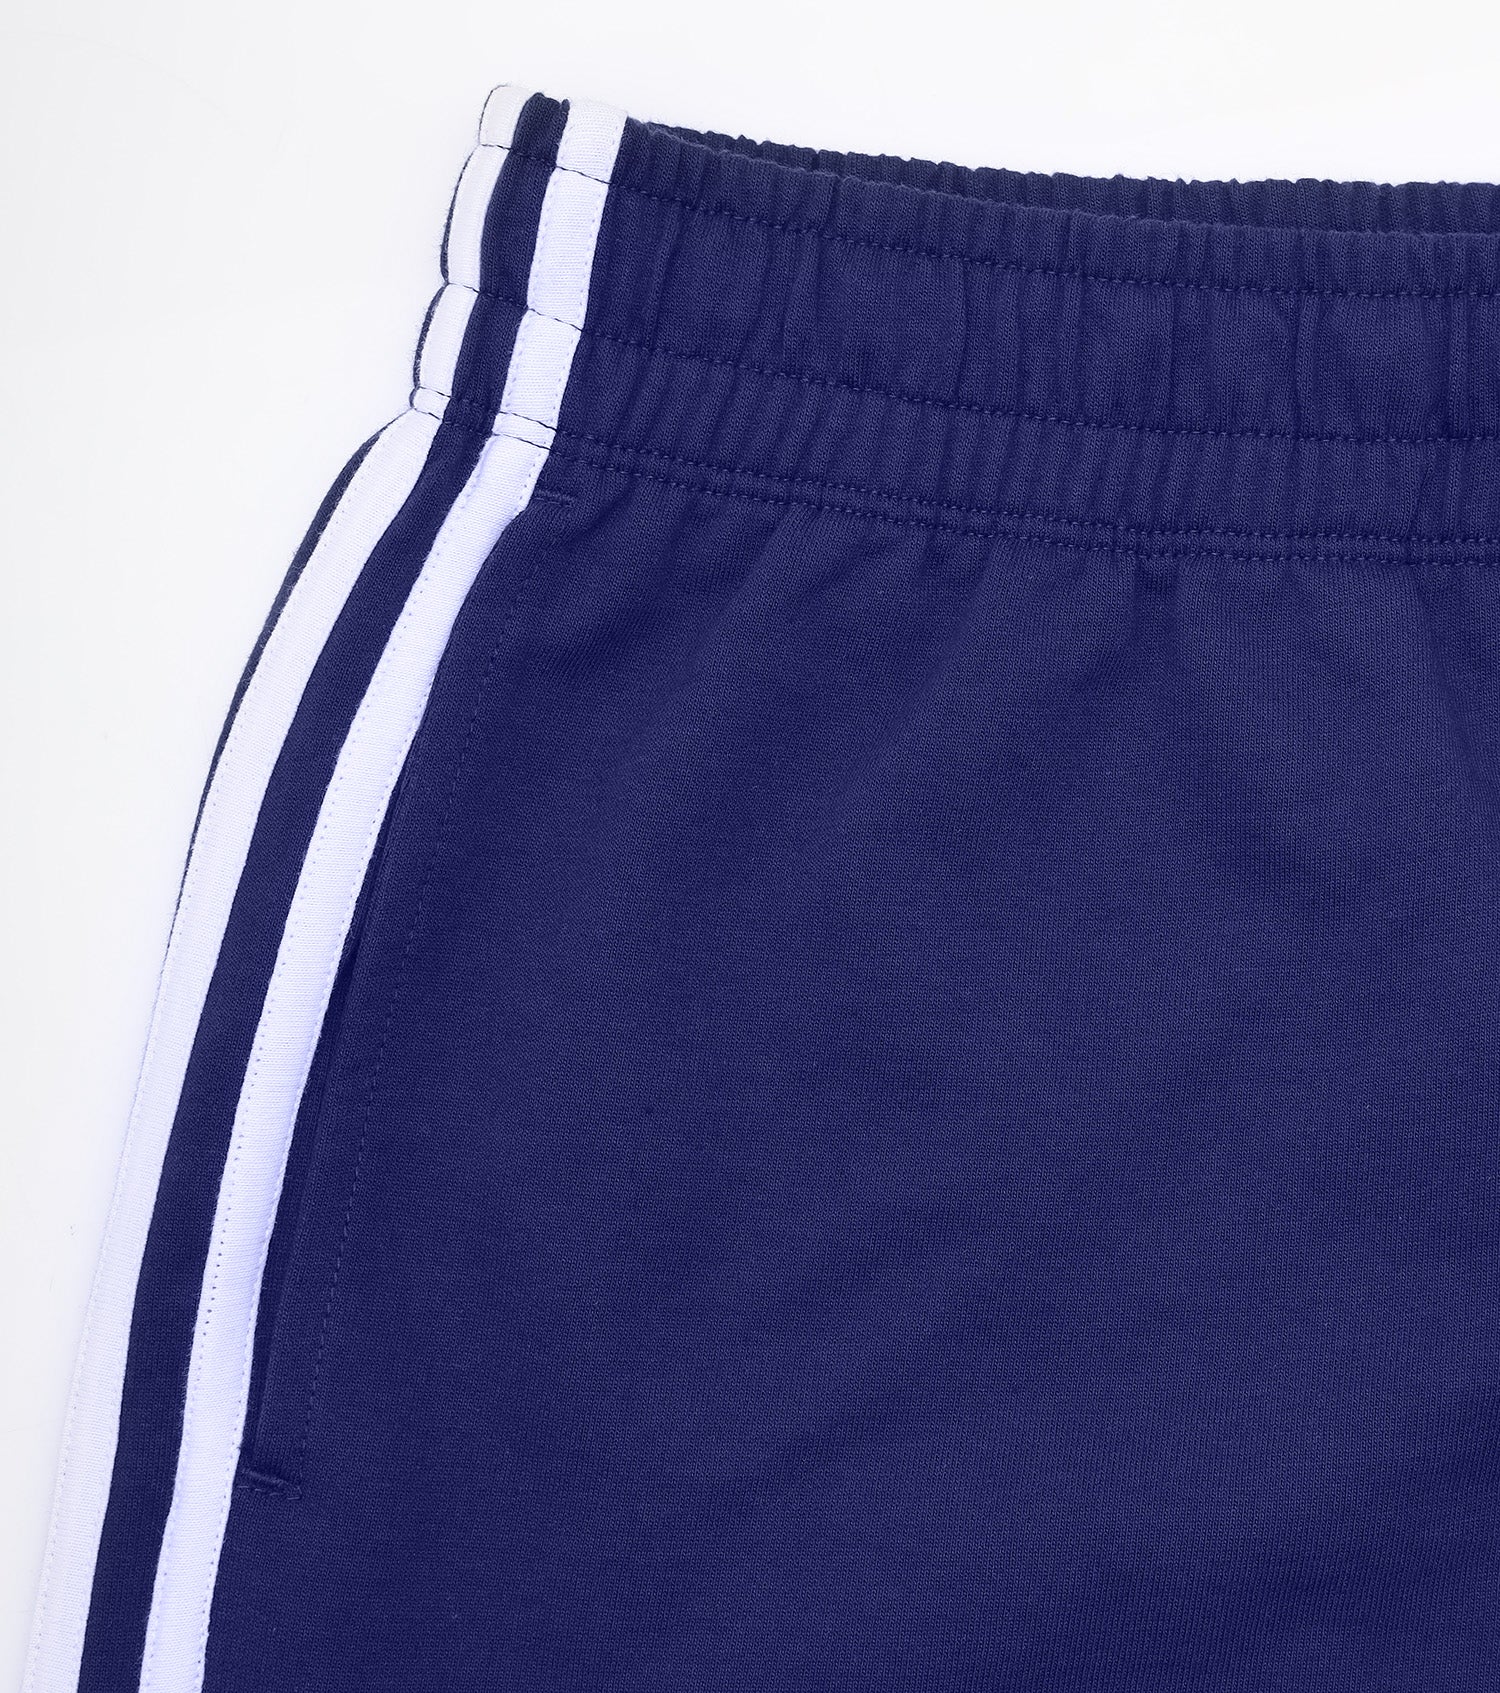 Enamor E702 Boxer Shorts - Cotton Terry Shorts with Contrast Binding for Stylish Comfort